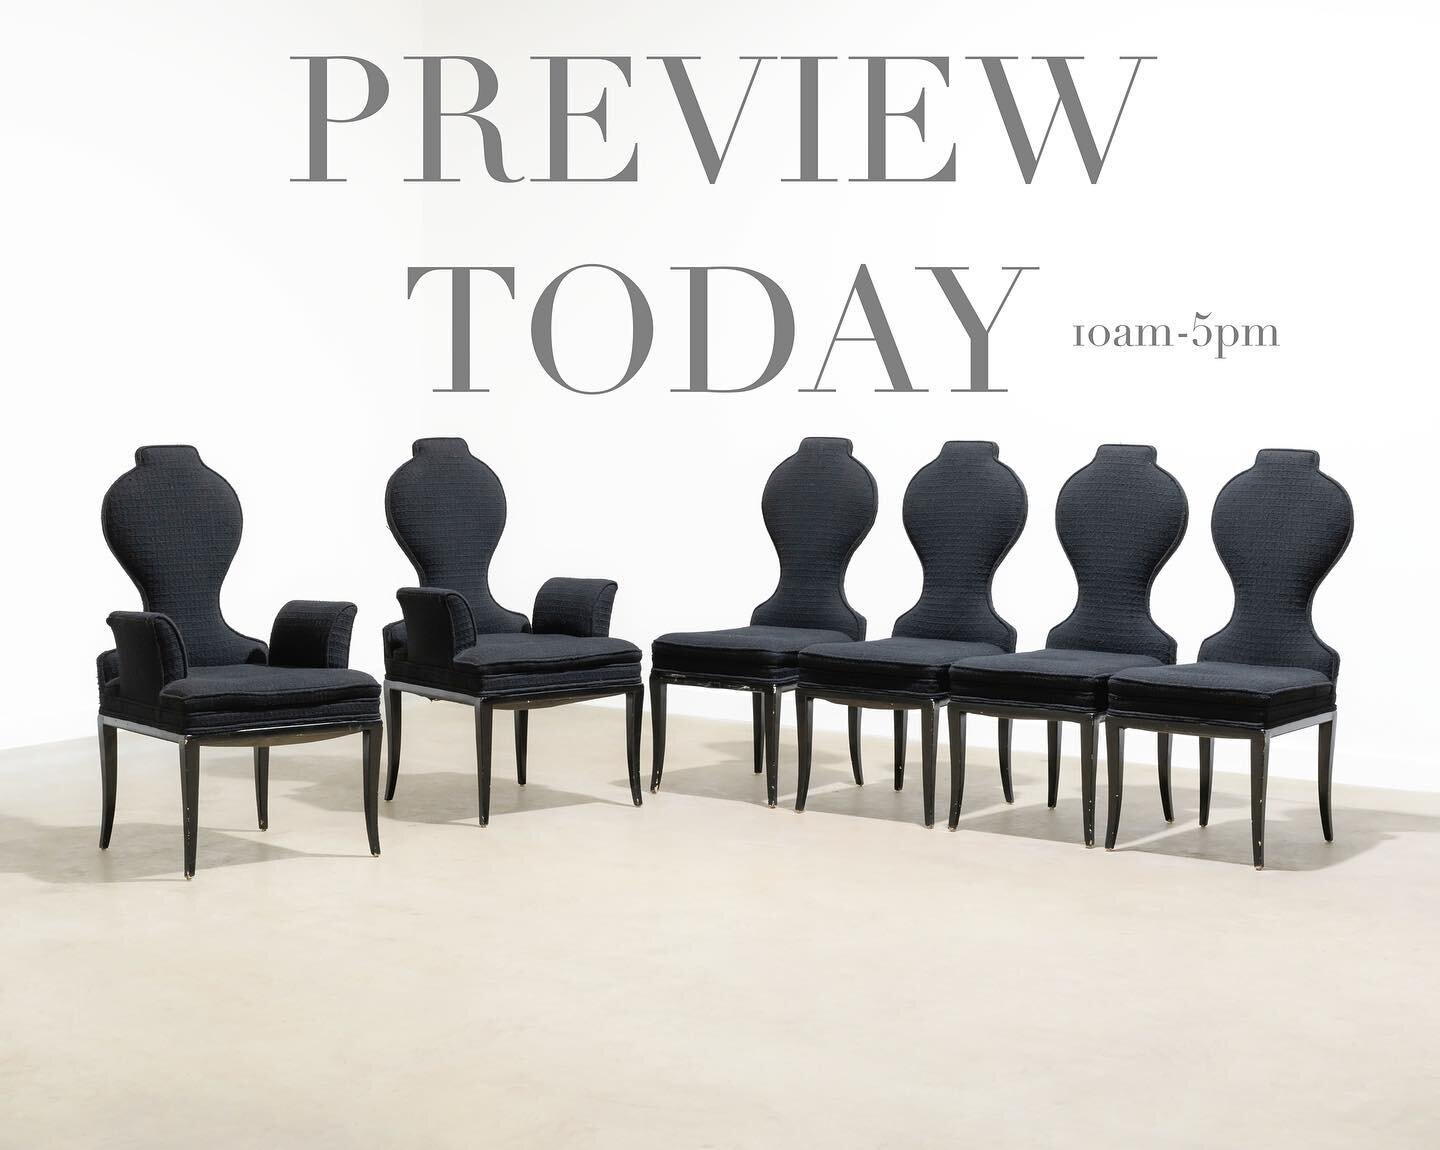 We&rsquo;re open today from 10 am until 5 pm for in person preview of our Modern Interiors 2 Auction that is taking place this Sunday. Come check out these #tommiparzinger dining chairs !